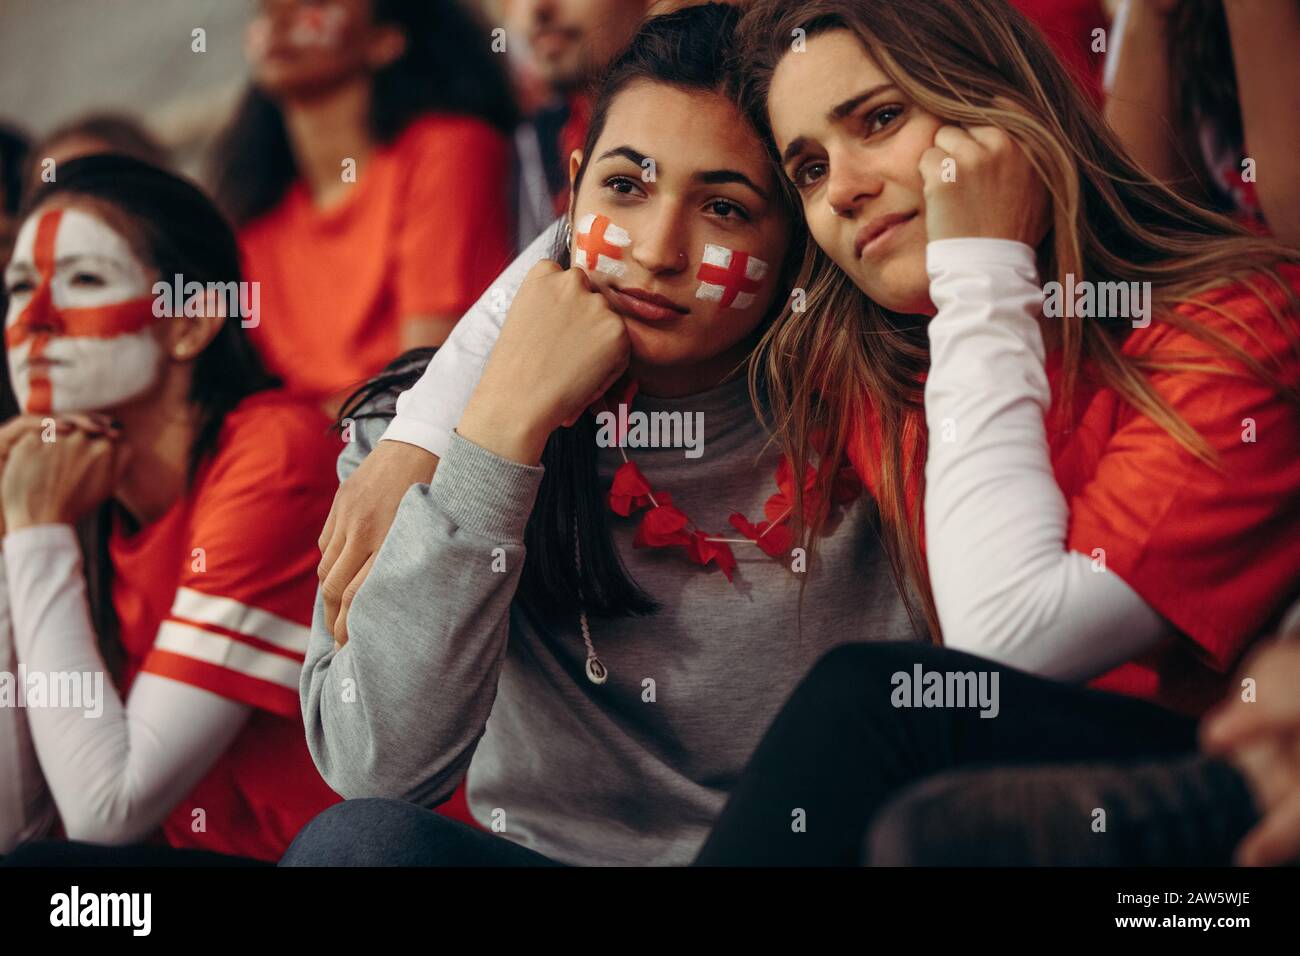 sports fans looking sad after losing a game. Upset English soccer fans in disappointment while watching a match in stadium. Stock Photo